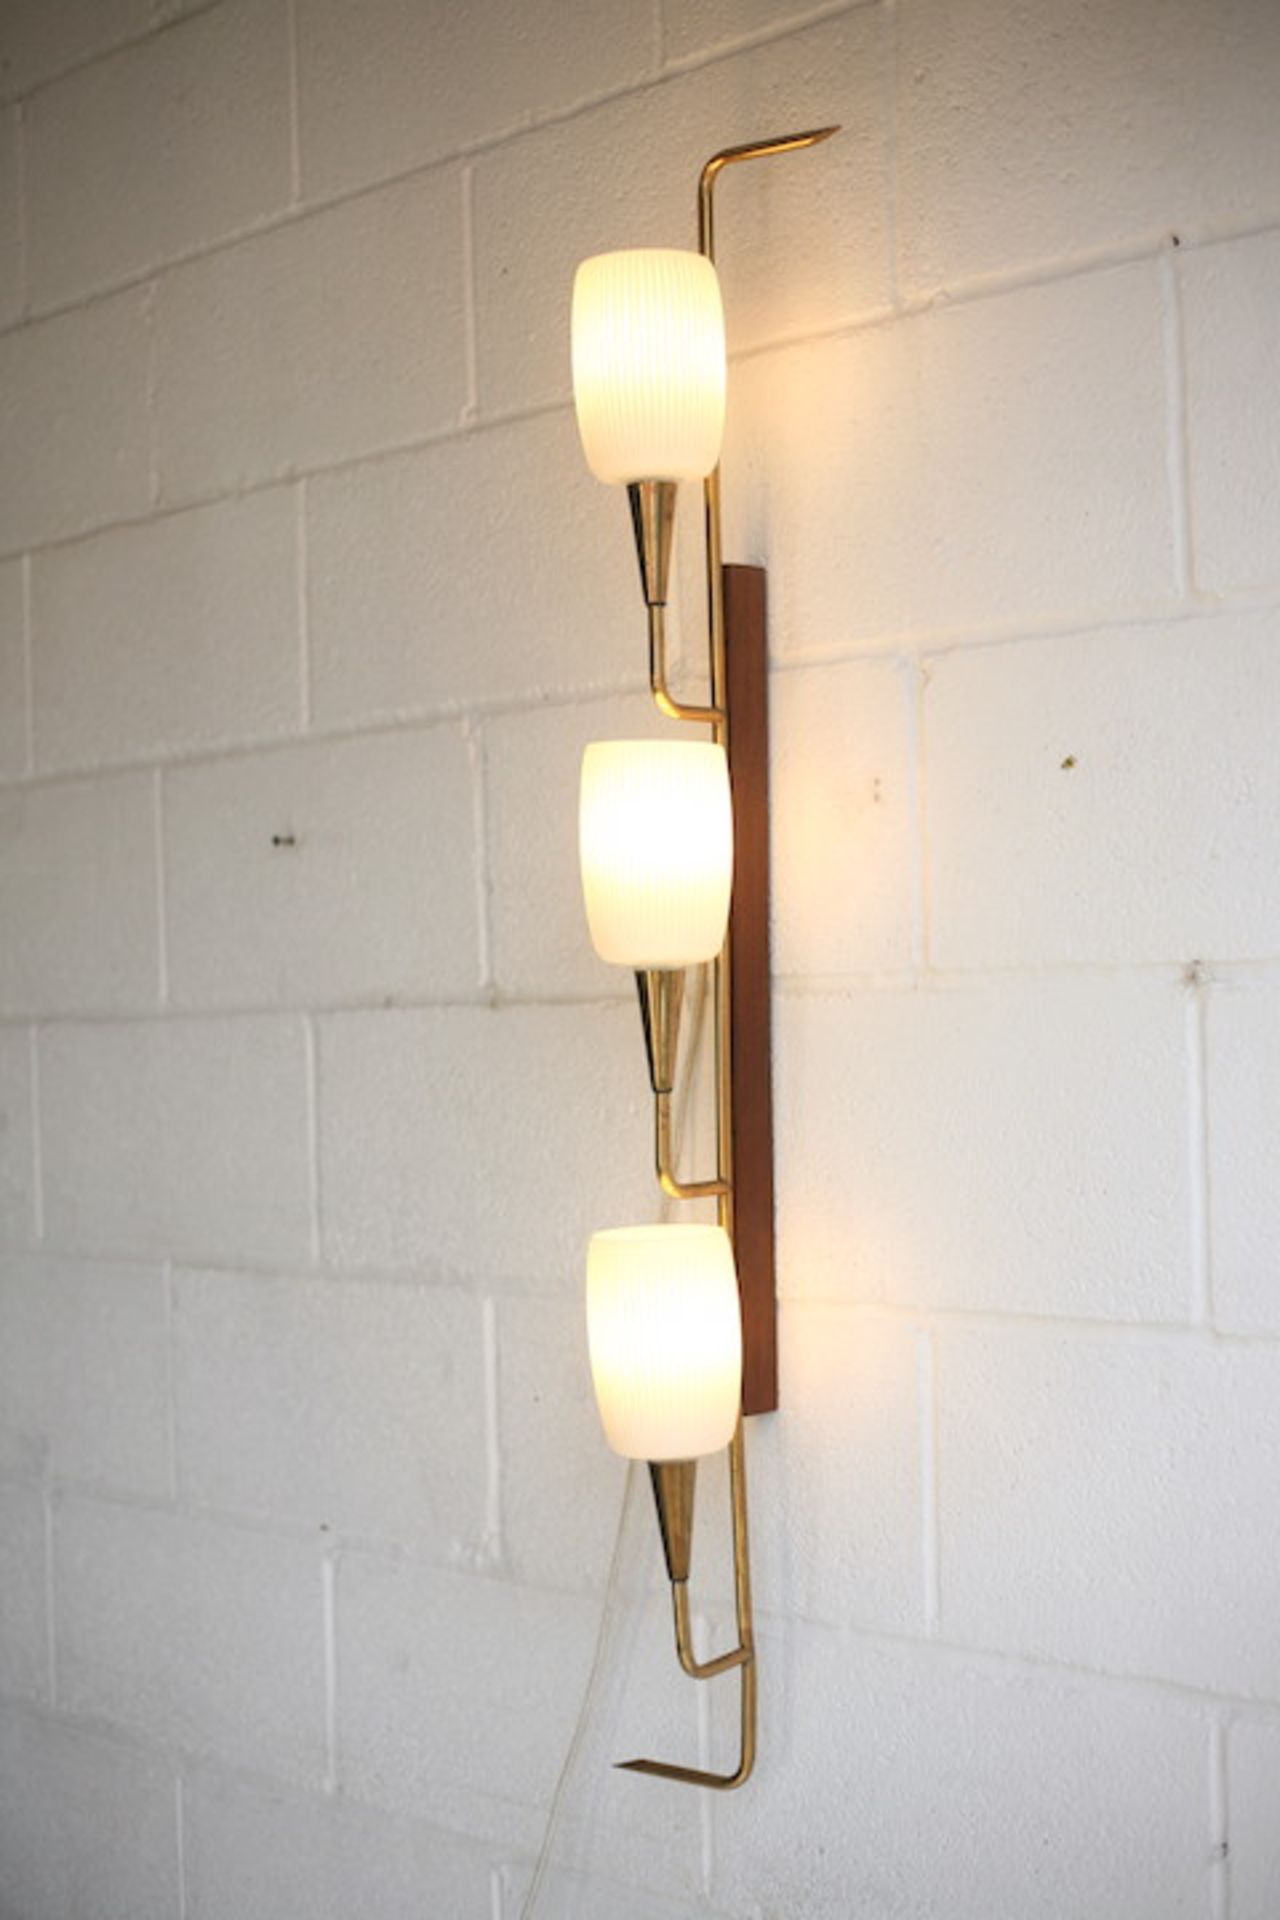 RETRO MID CENTURY 1950s TRIPLE FRENCH WALL LIGHT - Image 5 of 6